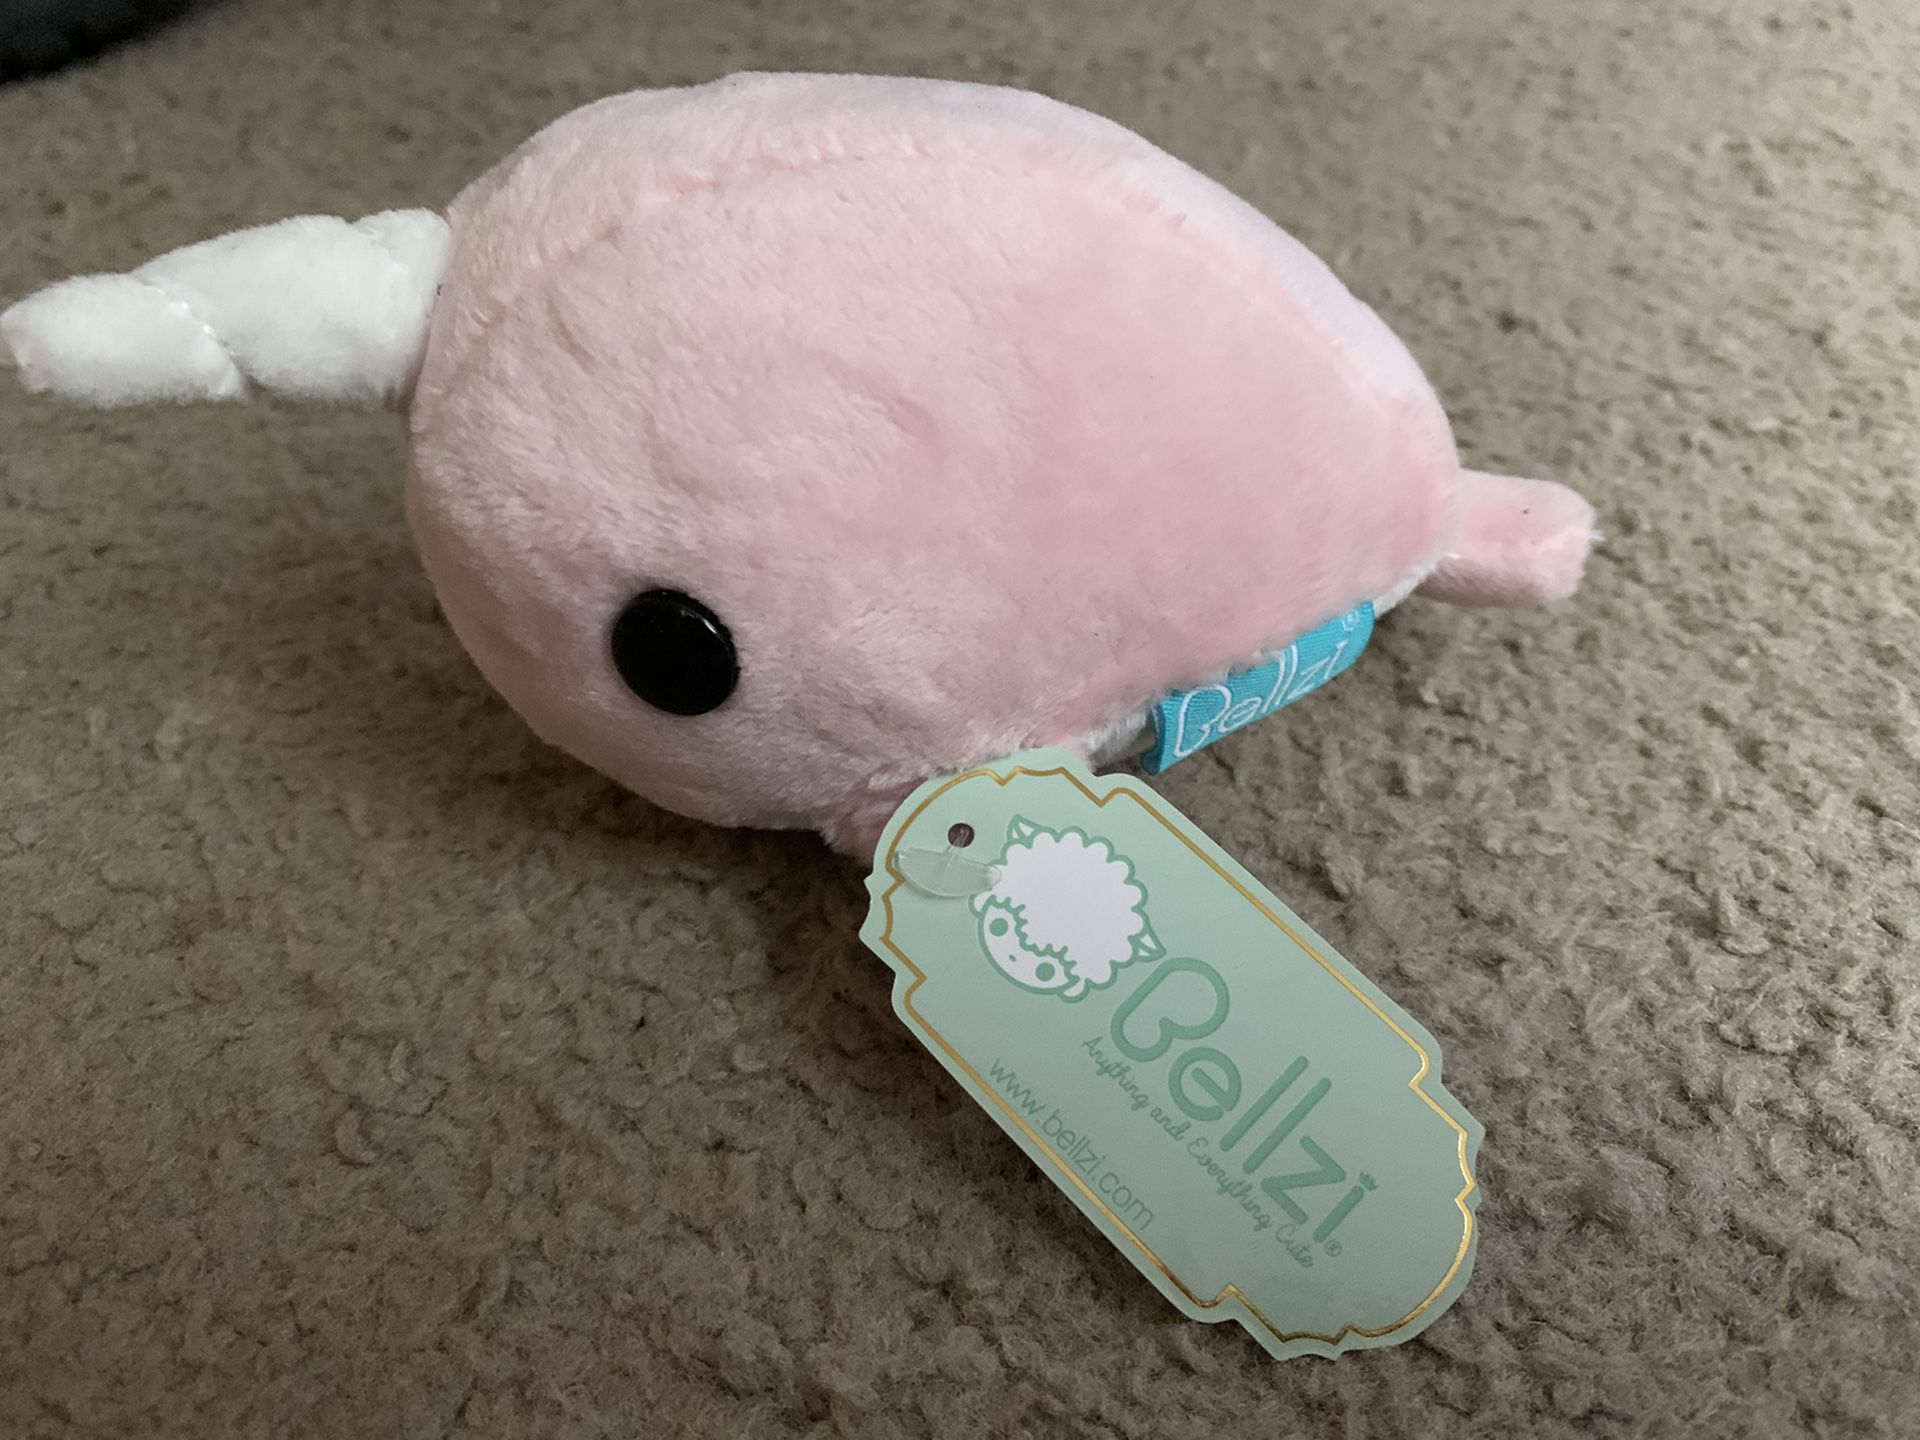 Bellzi Narwhal Pink New With Tags Plush Stuffed Animal Cute